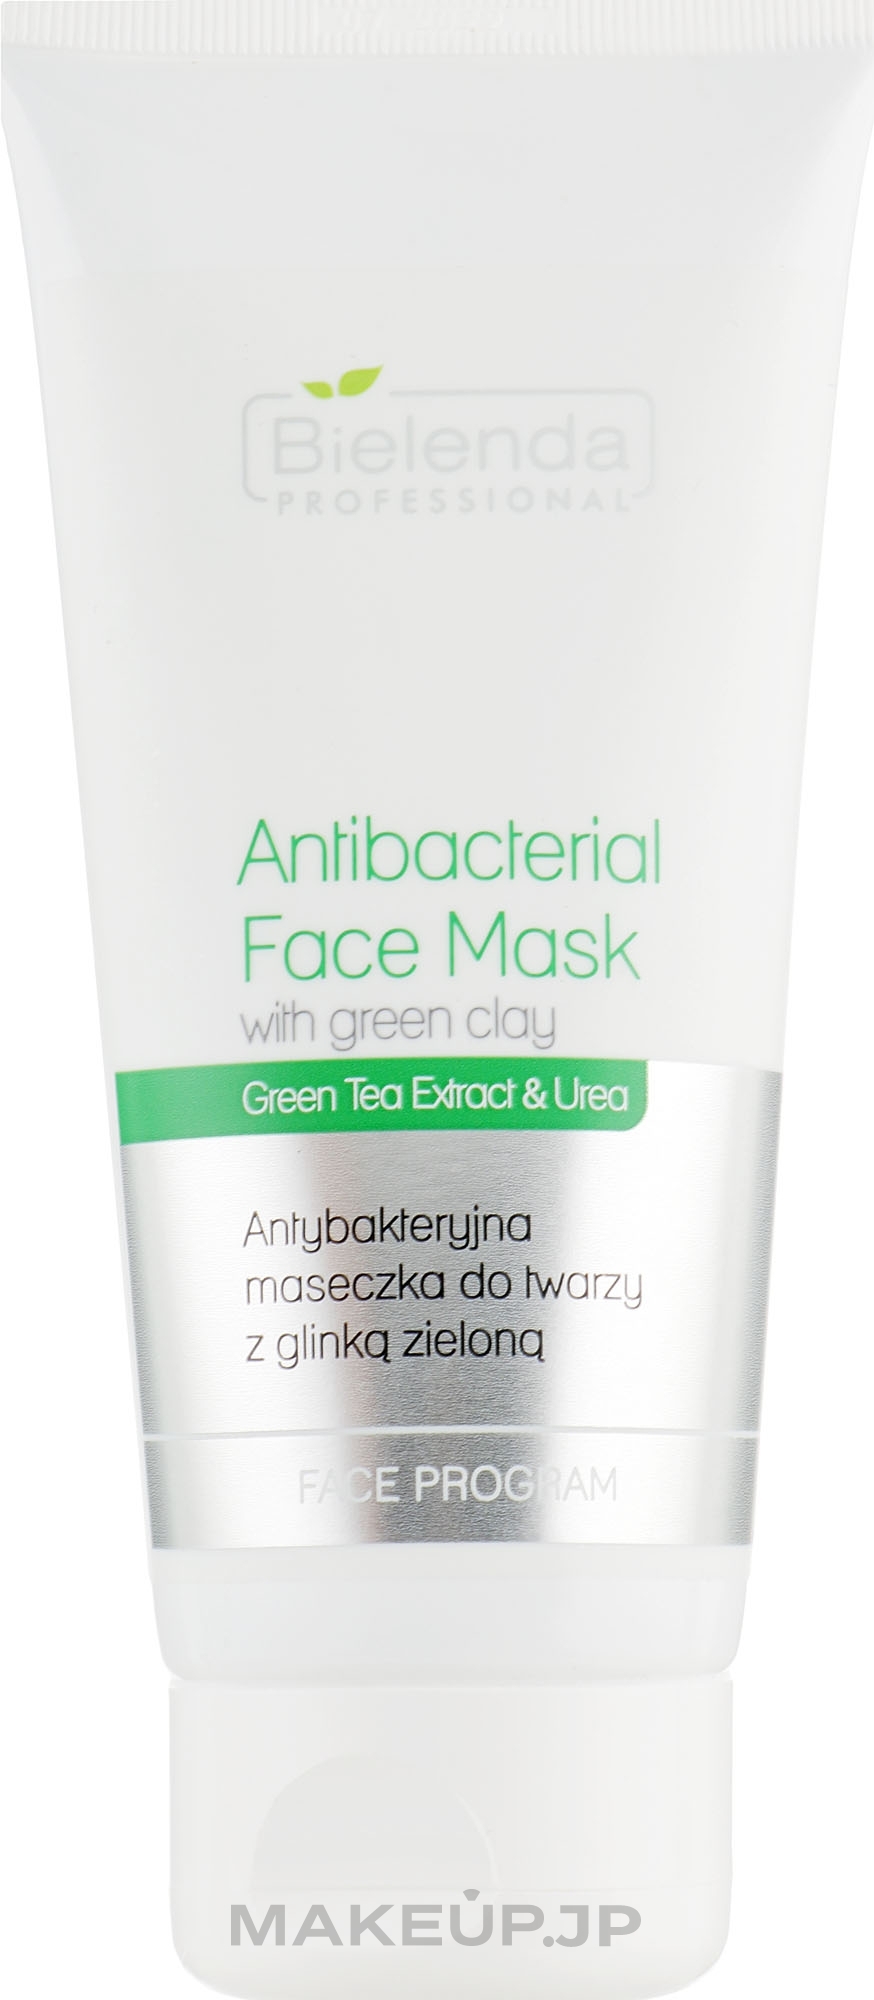 Antibacterial Face Mask with Green Algae - Bielenda Professional Face Program Antibacterial Face Mask with Green Clay — photo 150 g